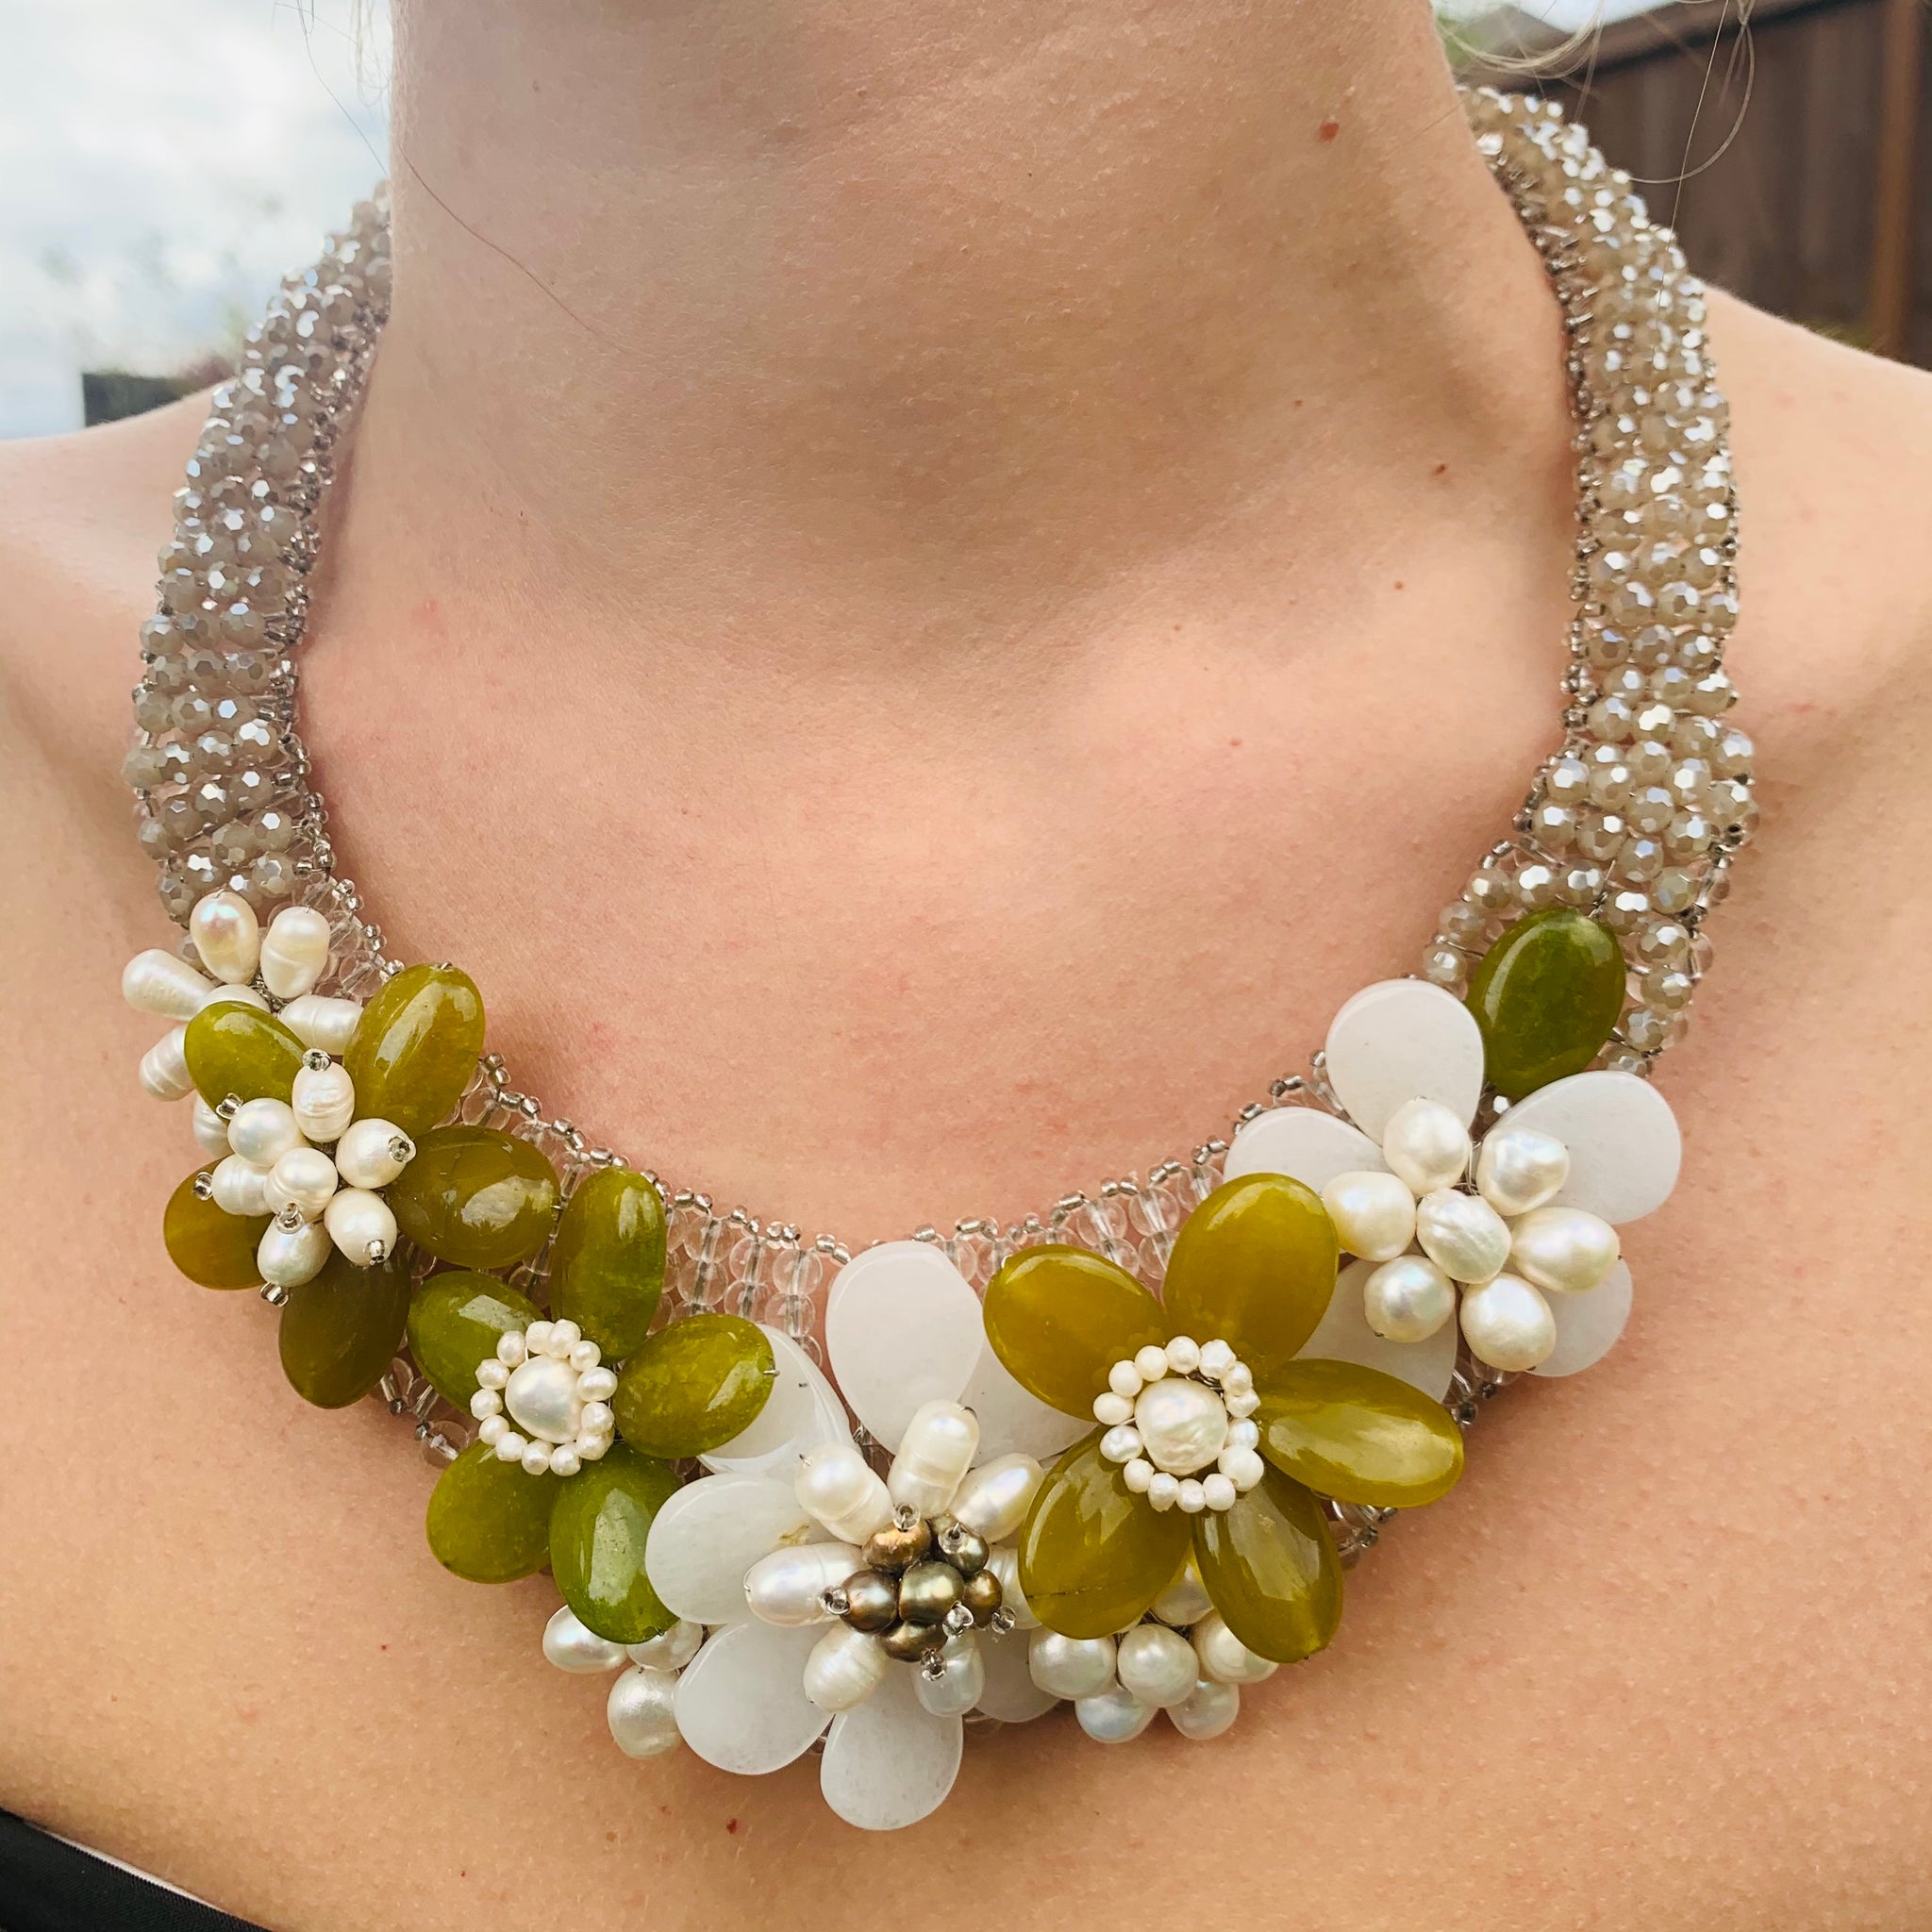 Handmade Choker Green Bejeweled Jade & Nugget Freshwater Pearls 20" Unique Floral Necklace